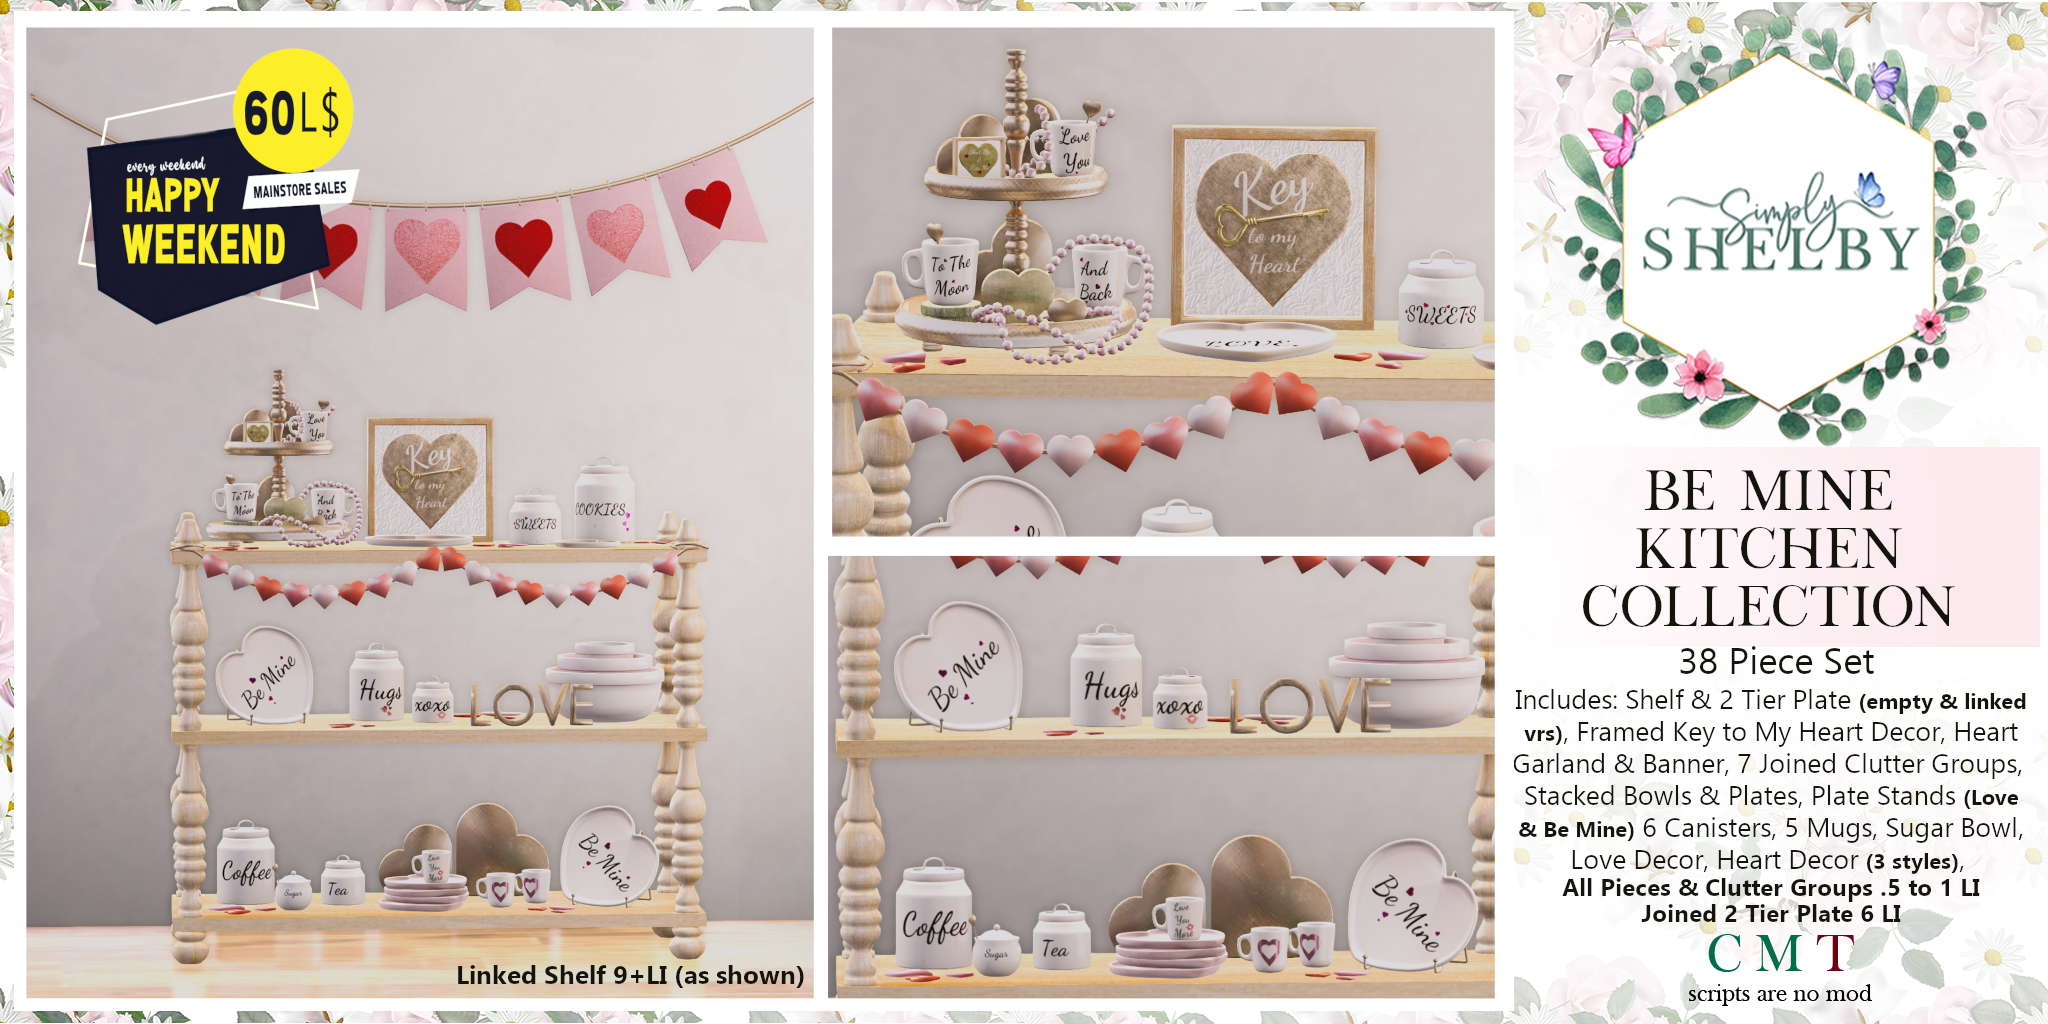 Simply Shelby – Be Mine Kitchen Collection